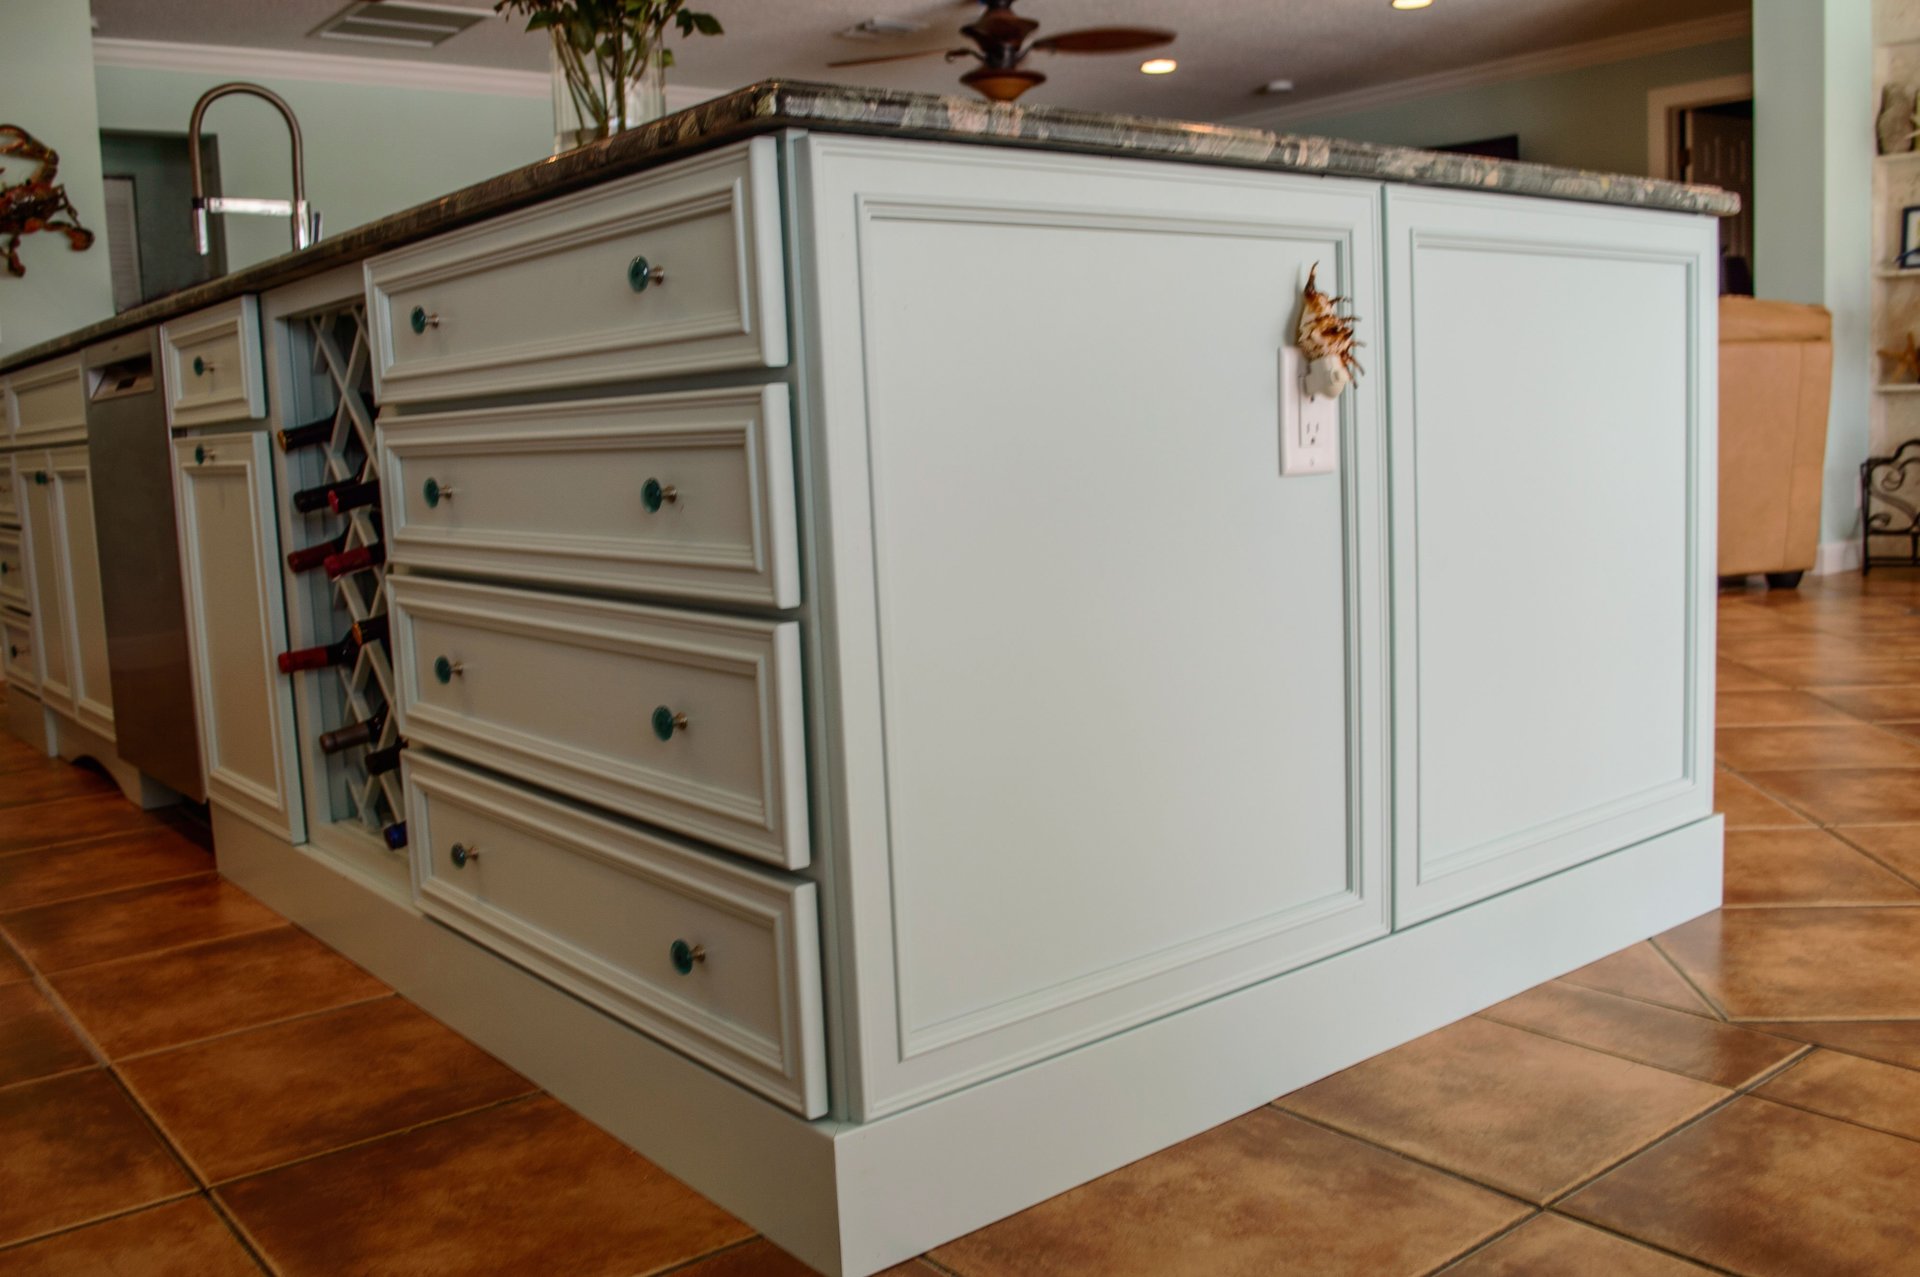 Designs In Cabinetry Photo